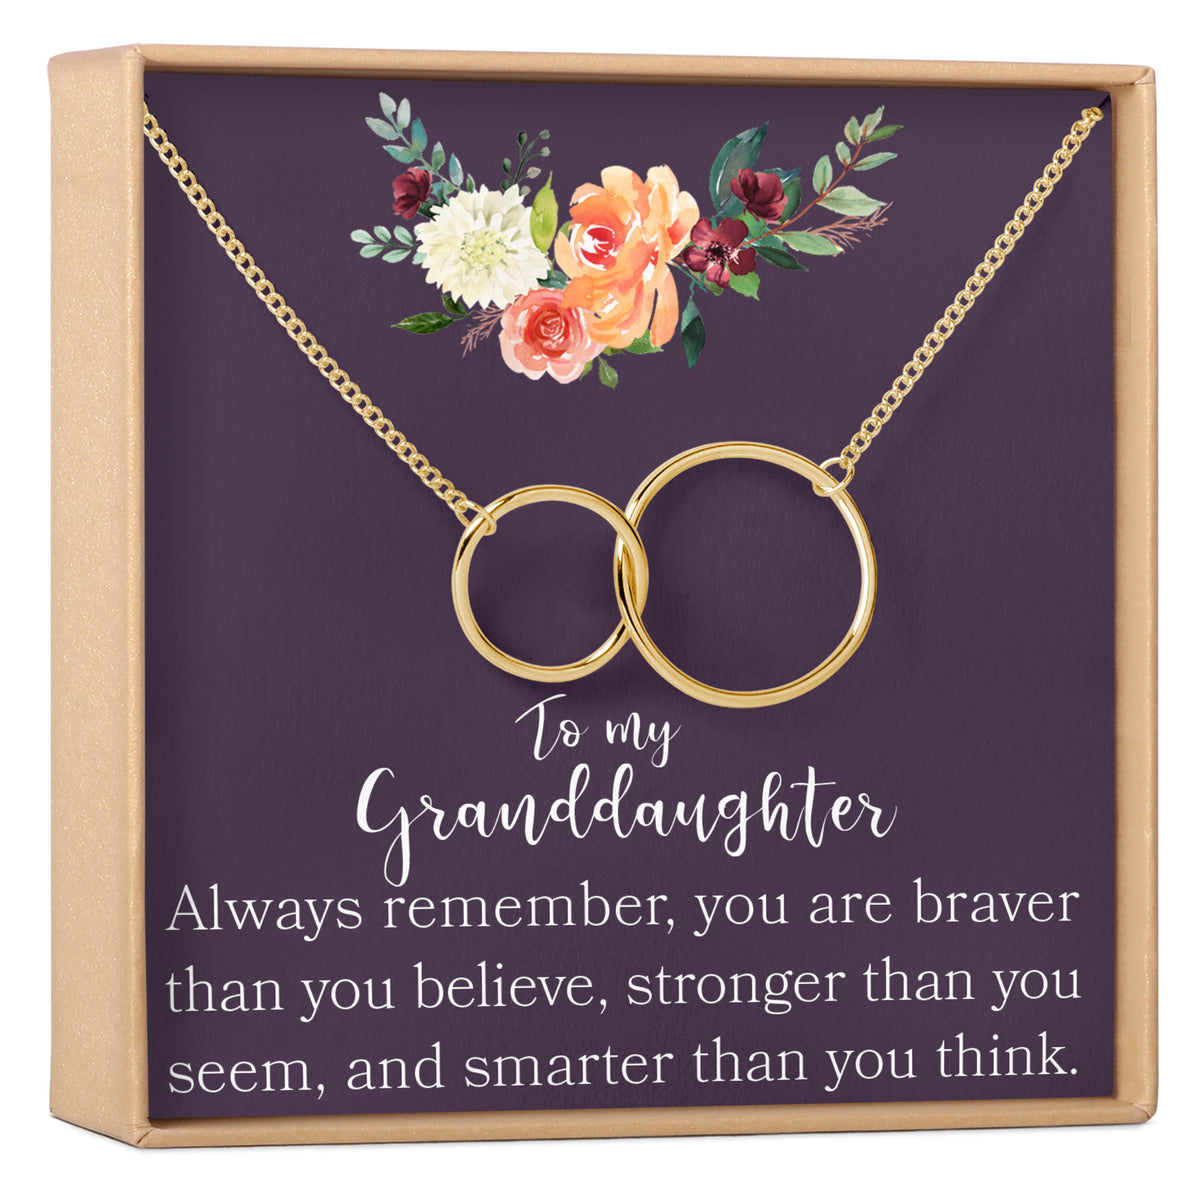 Granddaughter Necklace - Dear Ava, Jewelry / Necklaces / Pendants